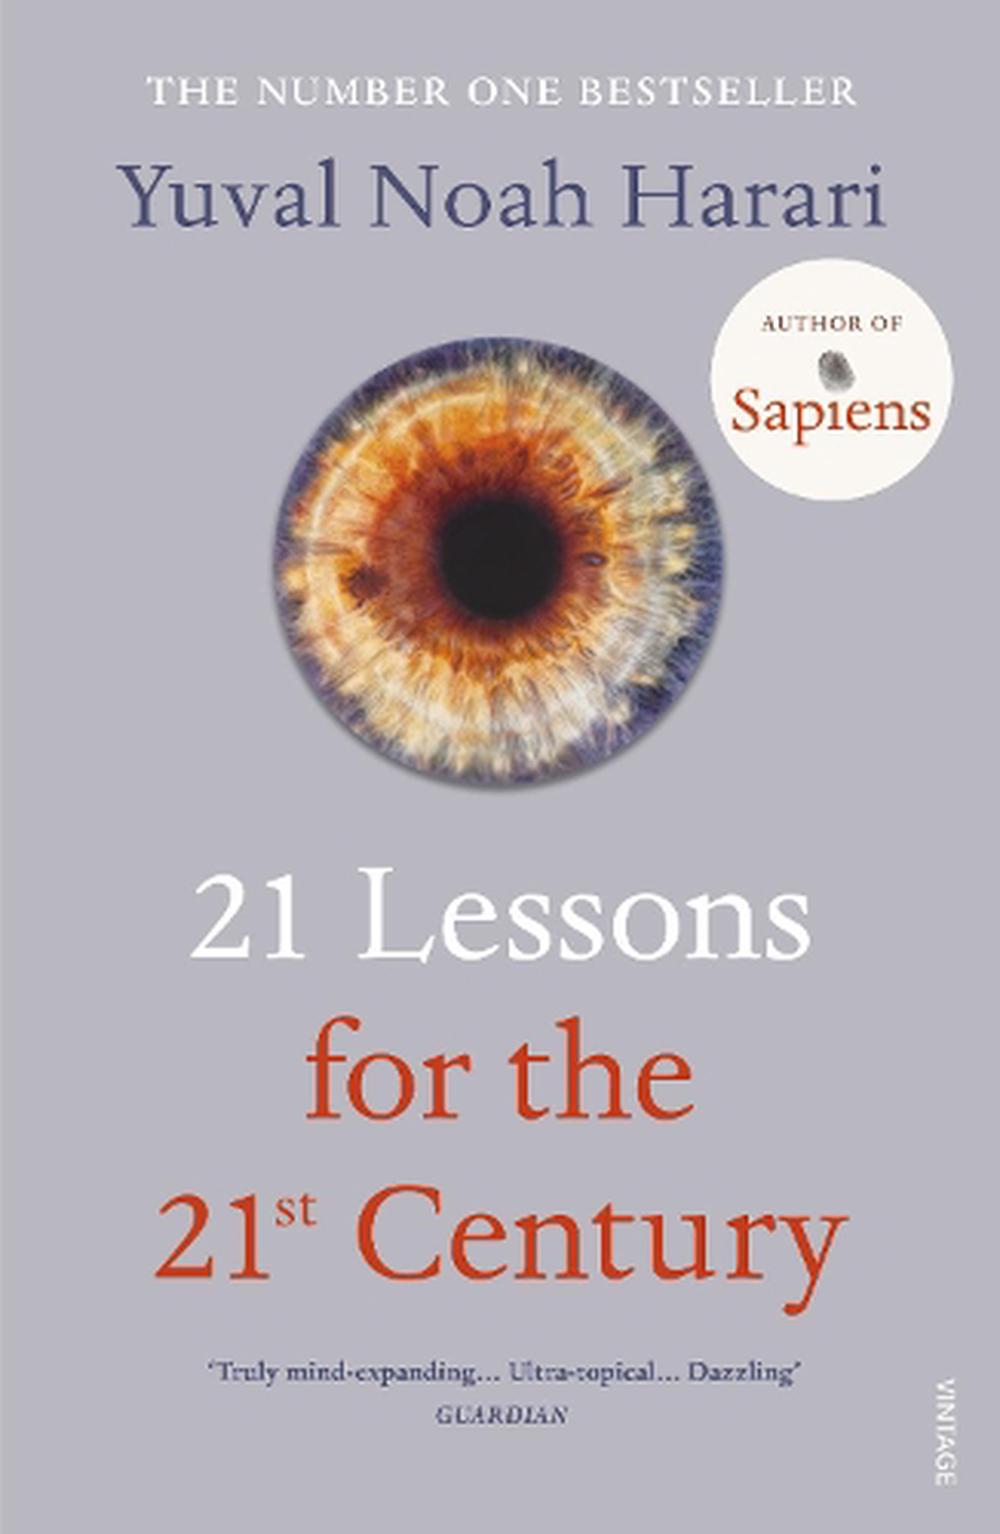 book review of 21 lessons for the 21st century